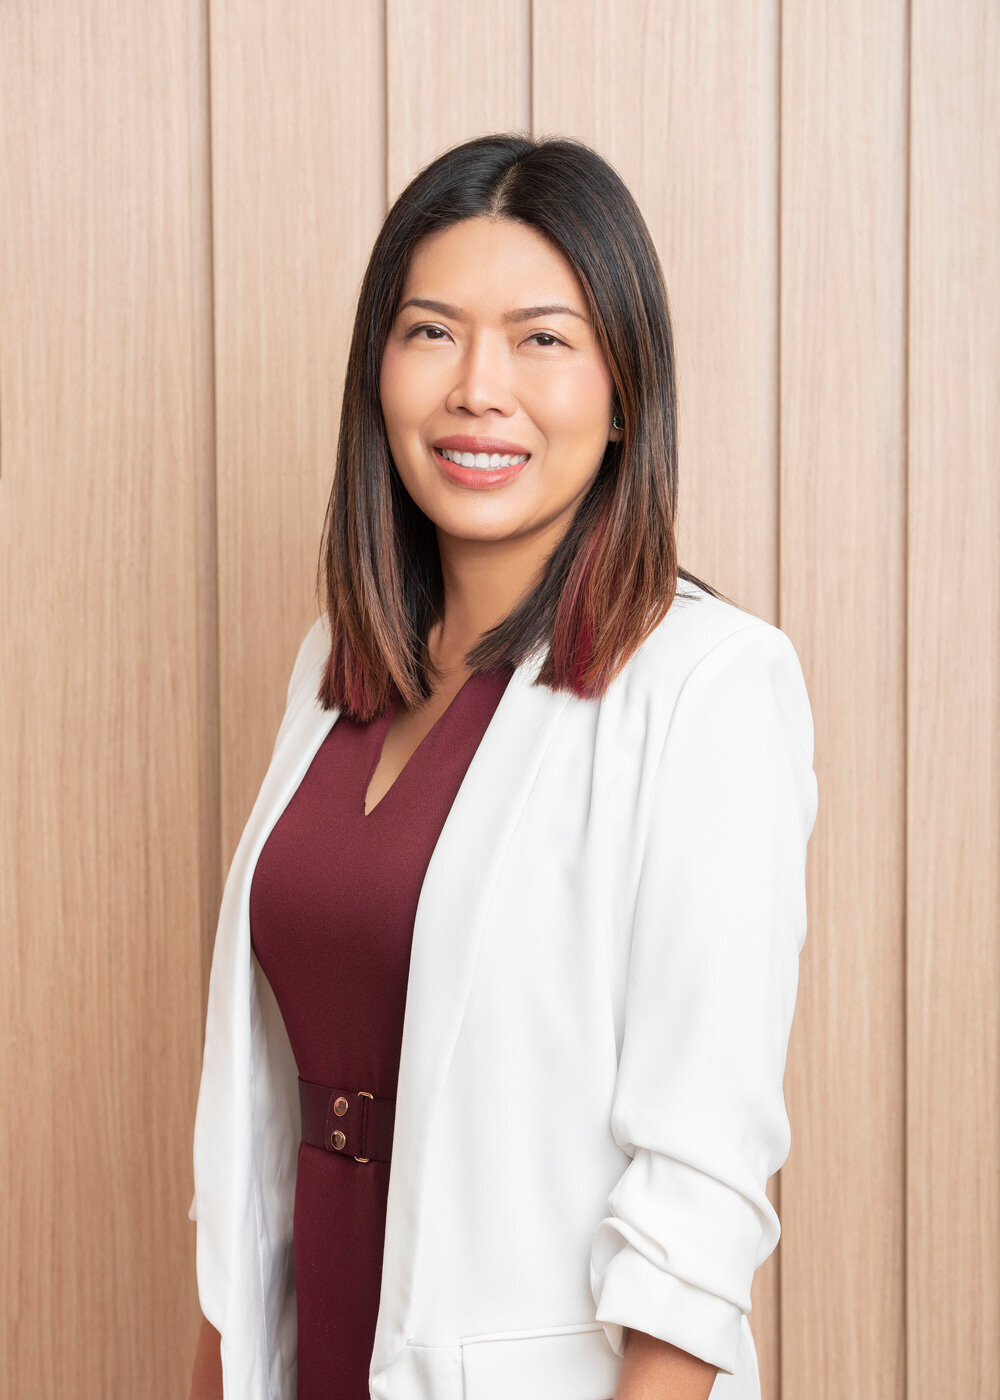 professional photos for doctors in Vancouver